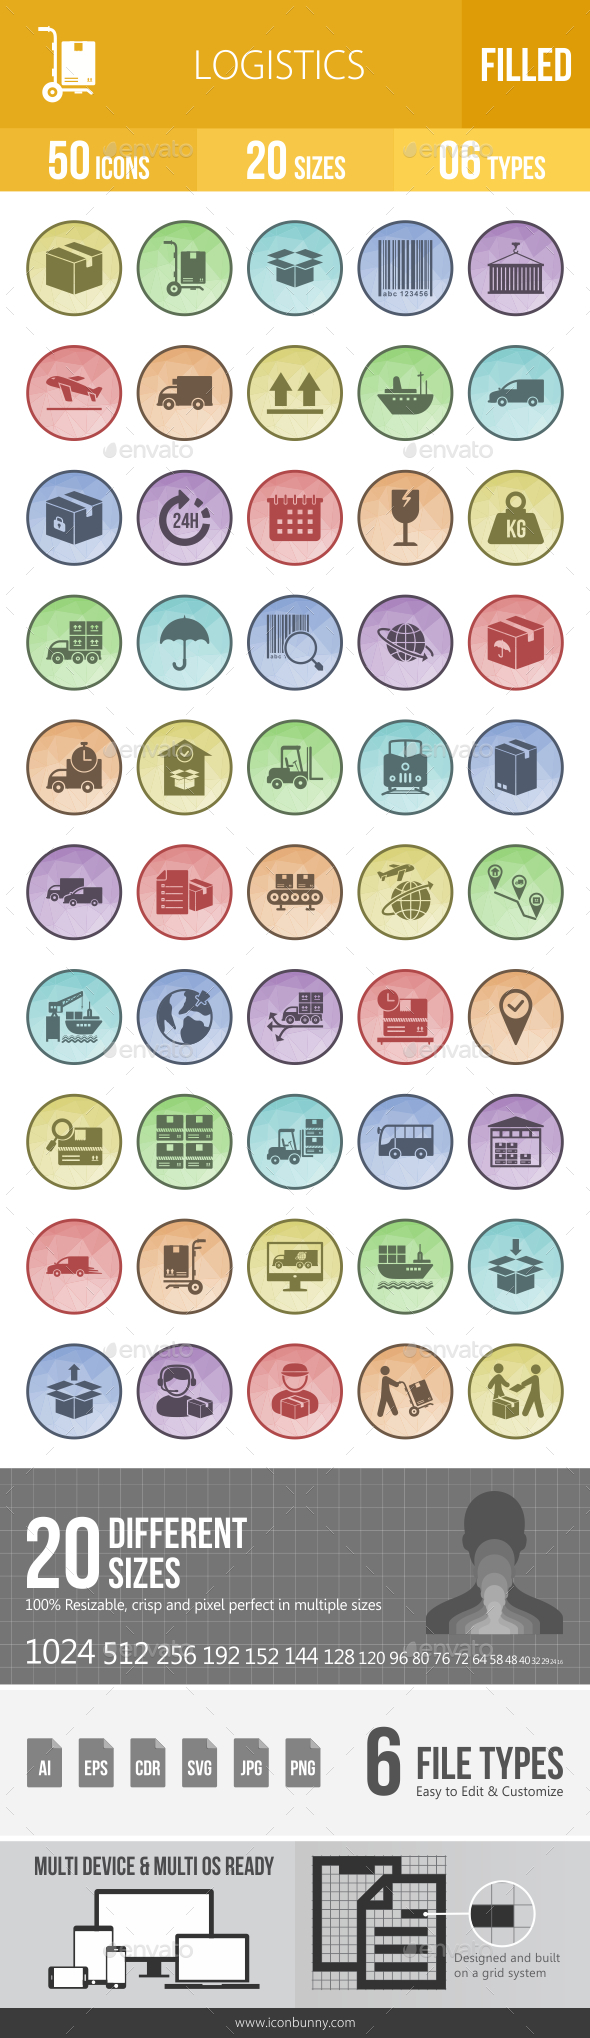 GraphicRiver 50 Logistics Filled Low Poly Icons 21153382